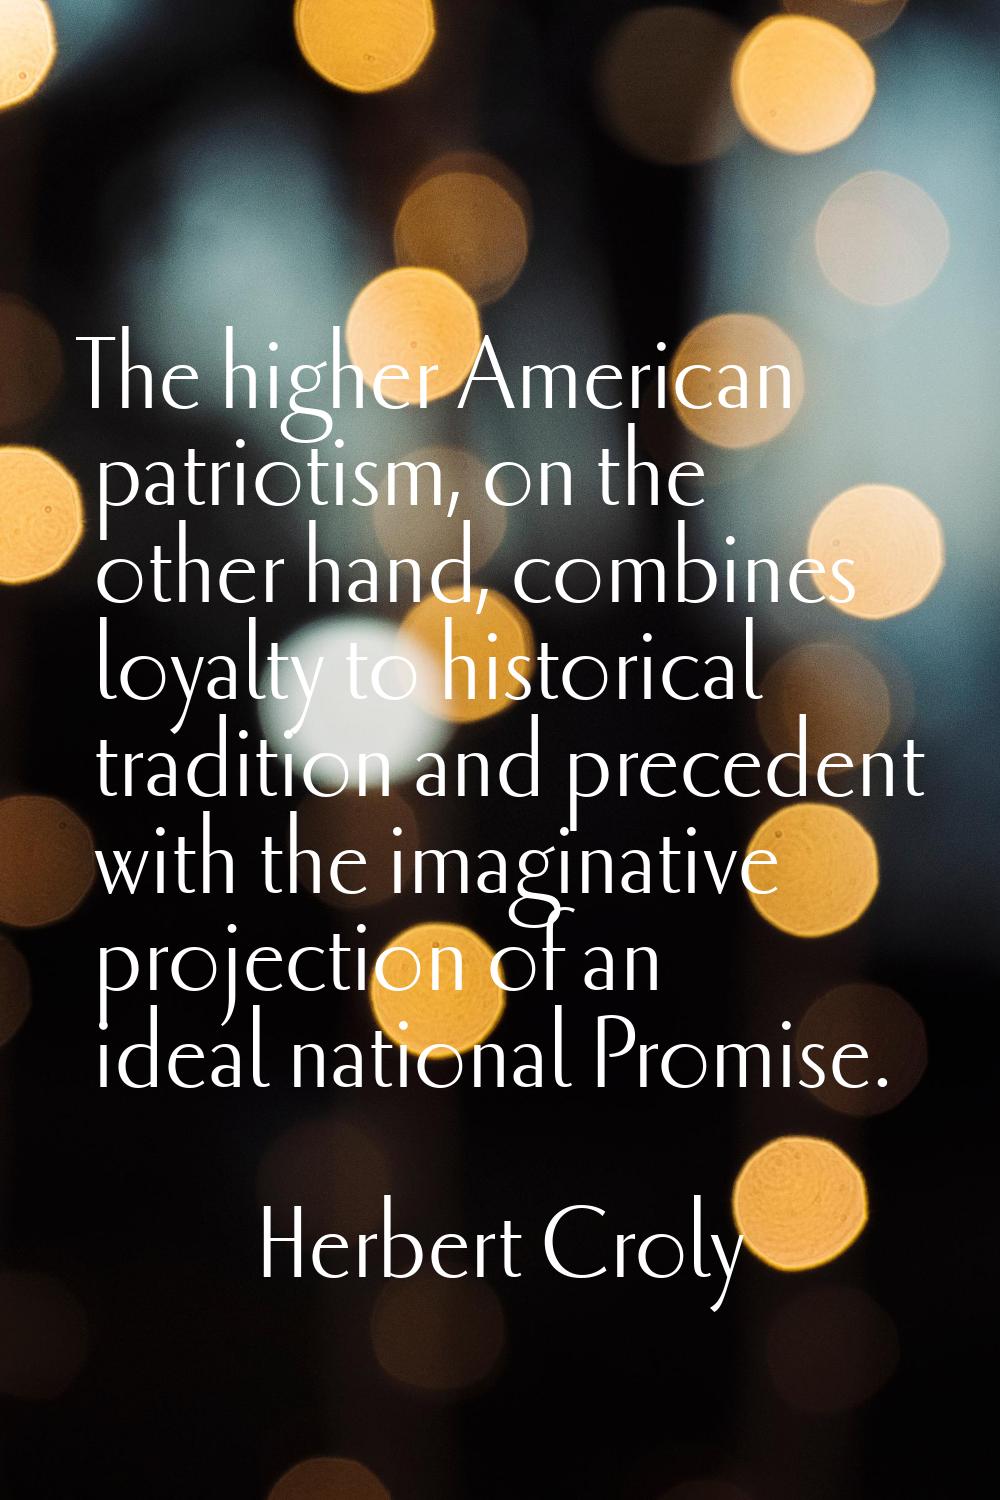 The higher American patriotism, on the other hand, combines loyalty to historical tradition and pre